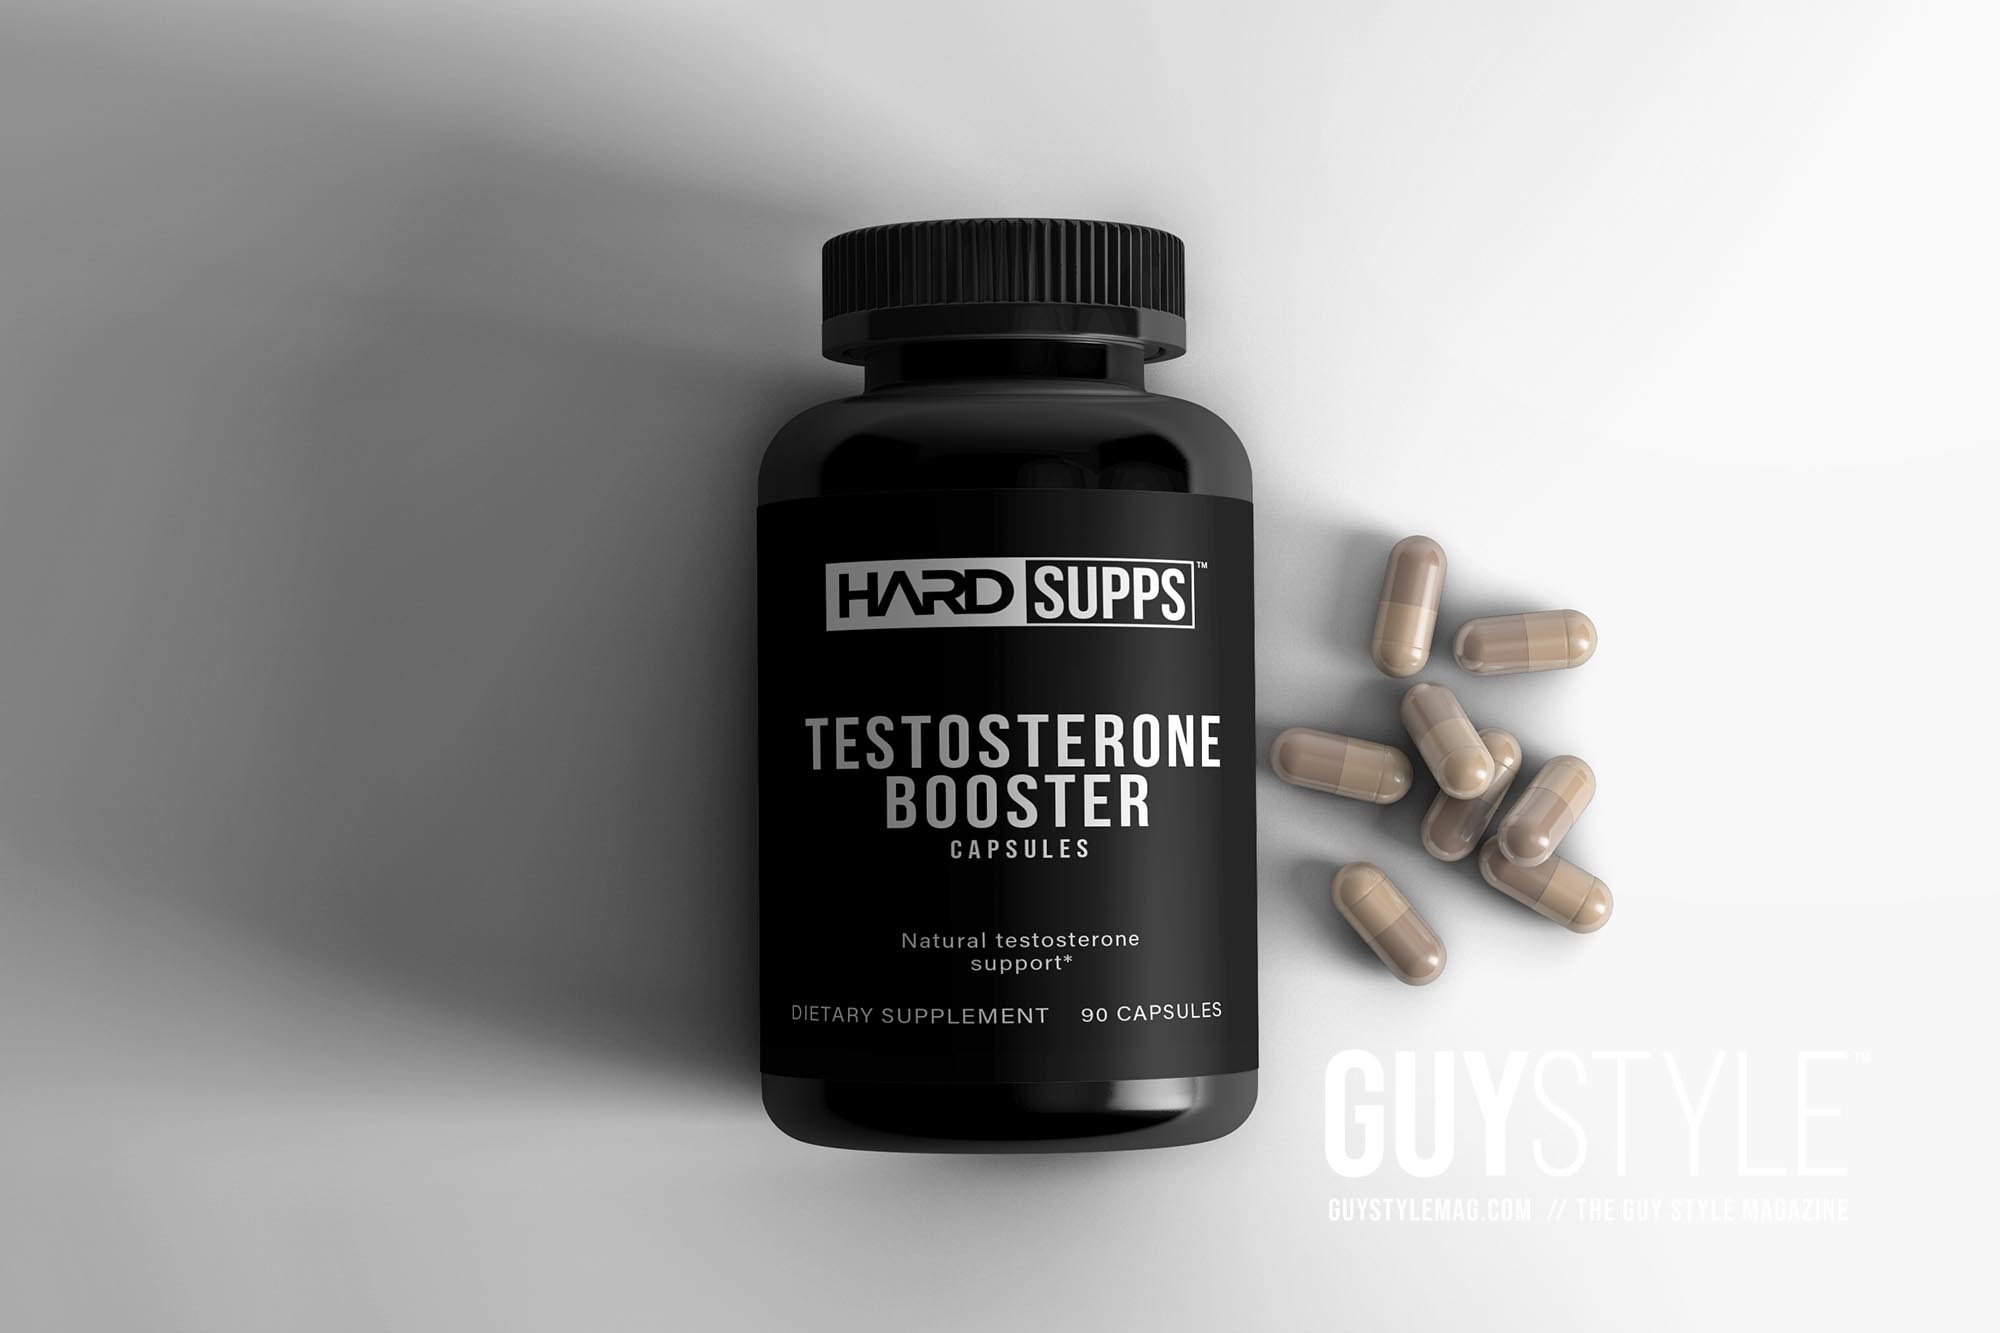 Turning Up the Heat: How HARD SUPPS' Natural Testosterone Booster Amplifies Your Natural Mojo – Presented by HARD SUPPS – Natural Bodybuilding Supplements for Men